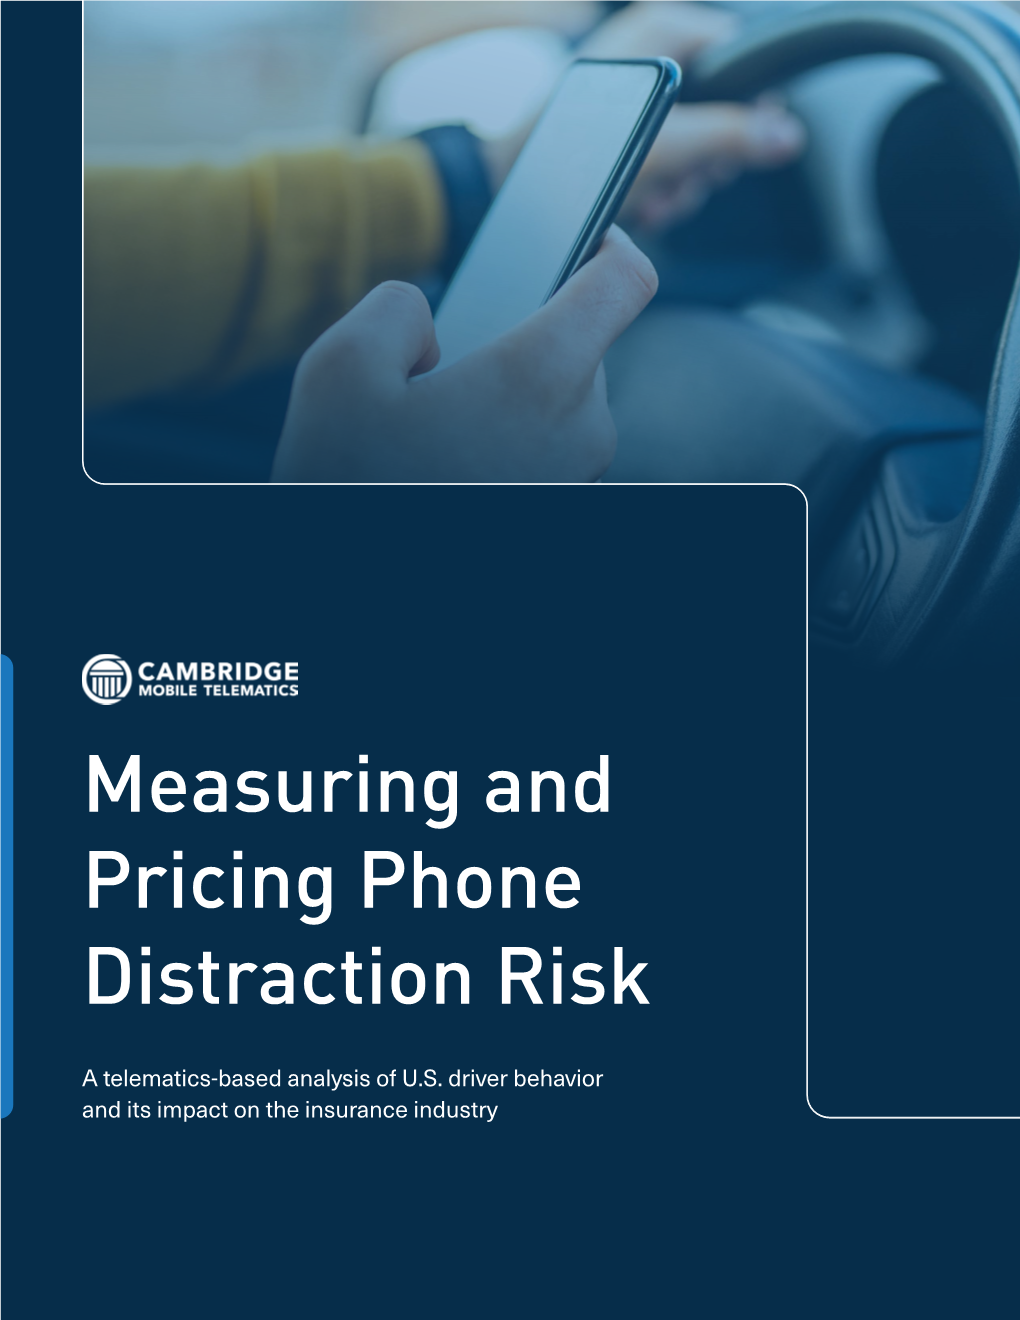 Measuring and Pricing Phone Distraction Risk